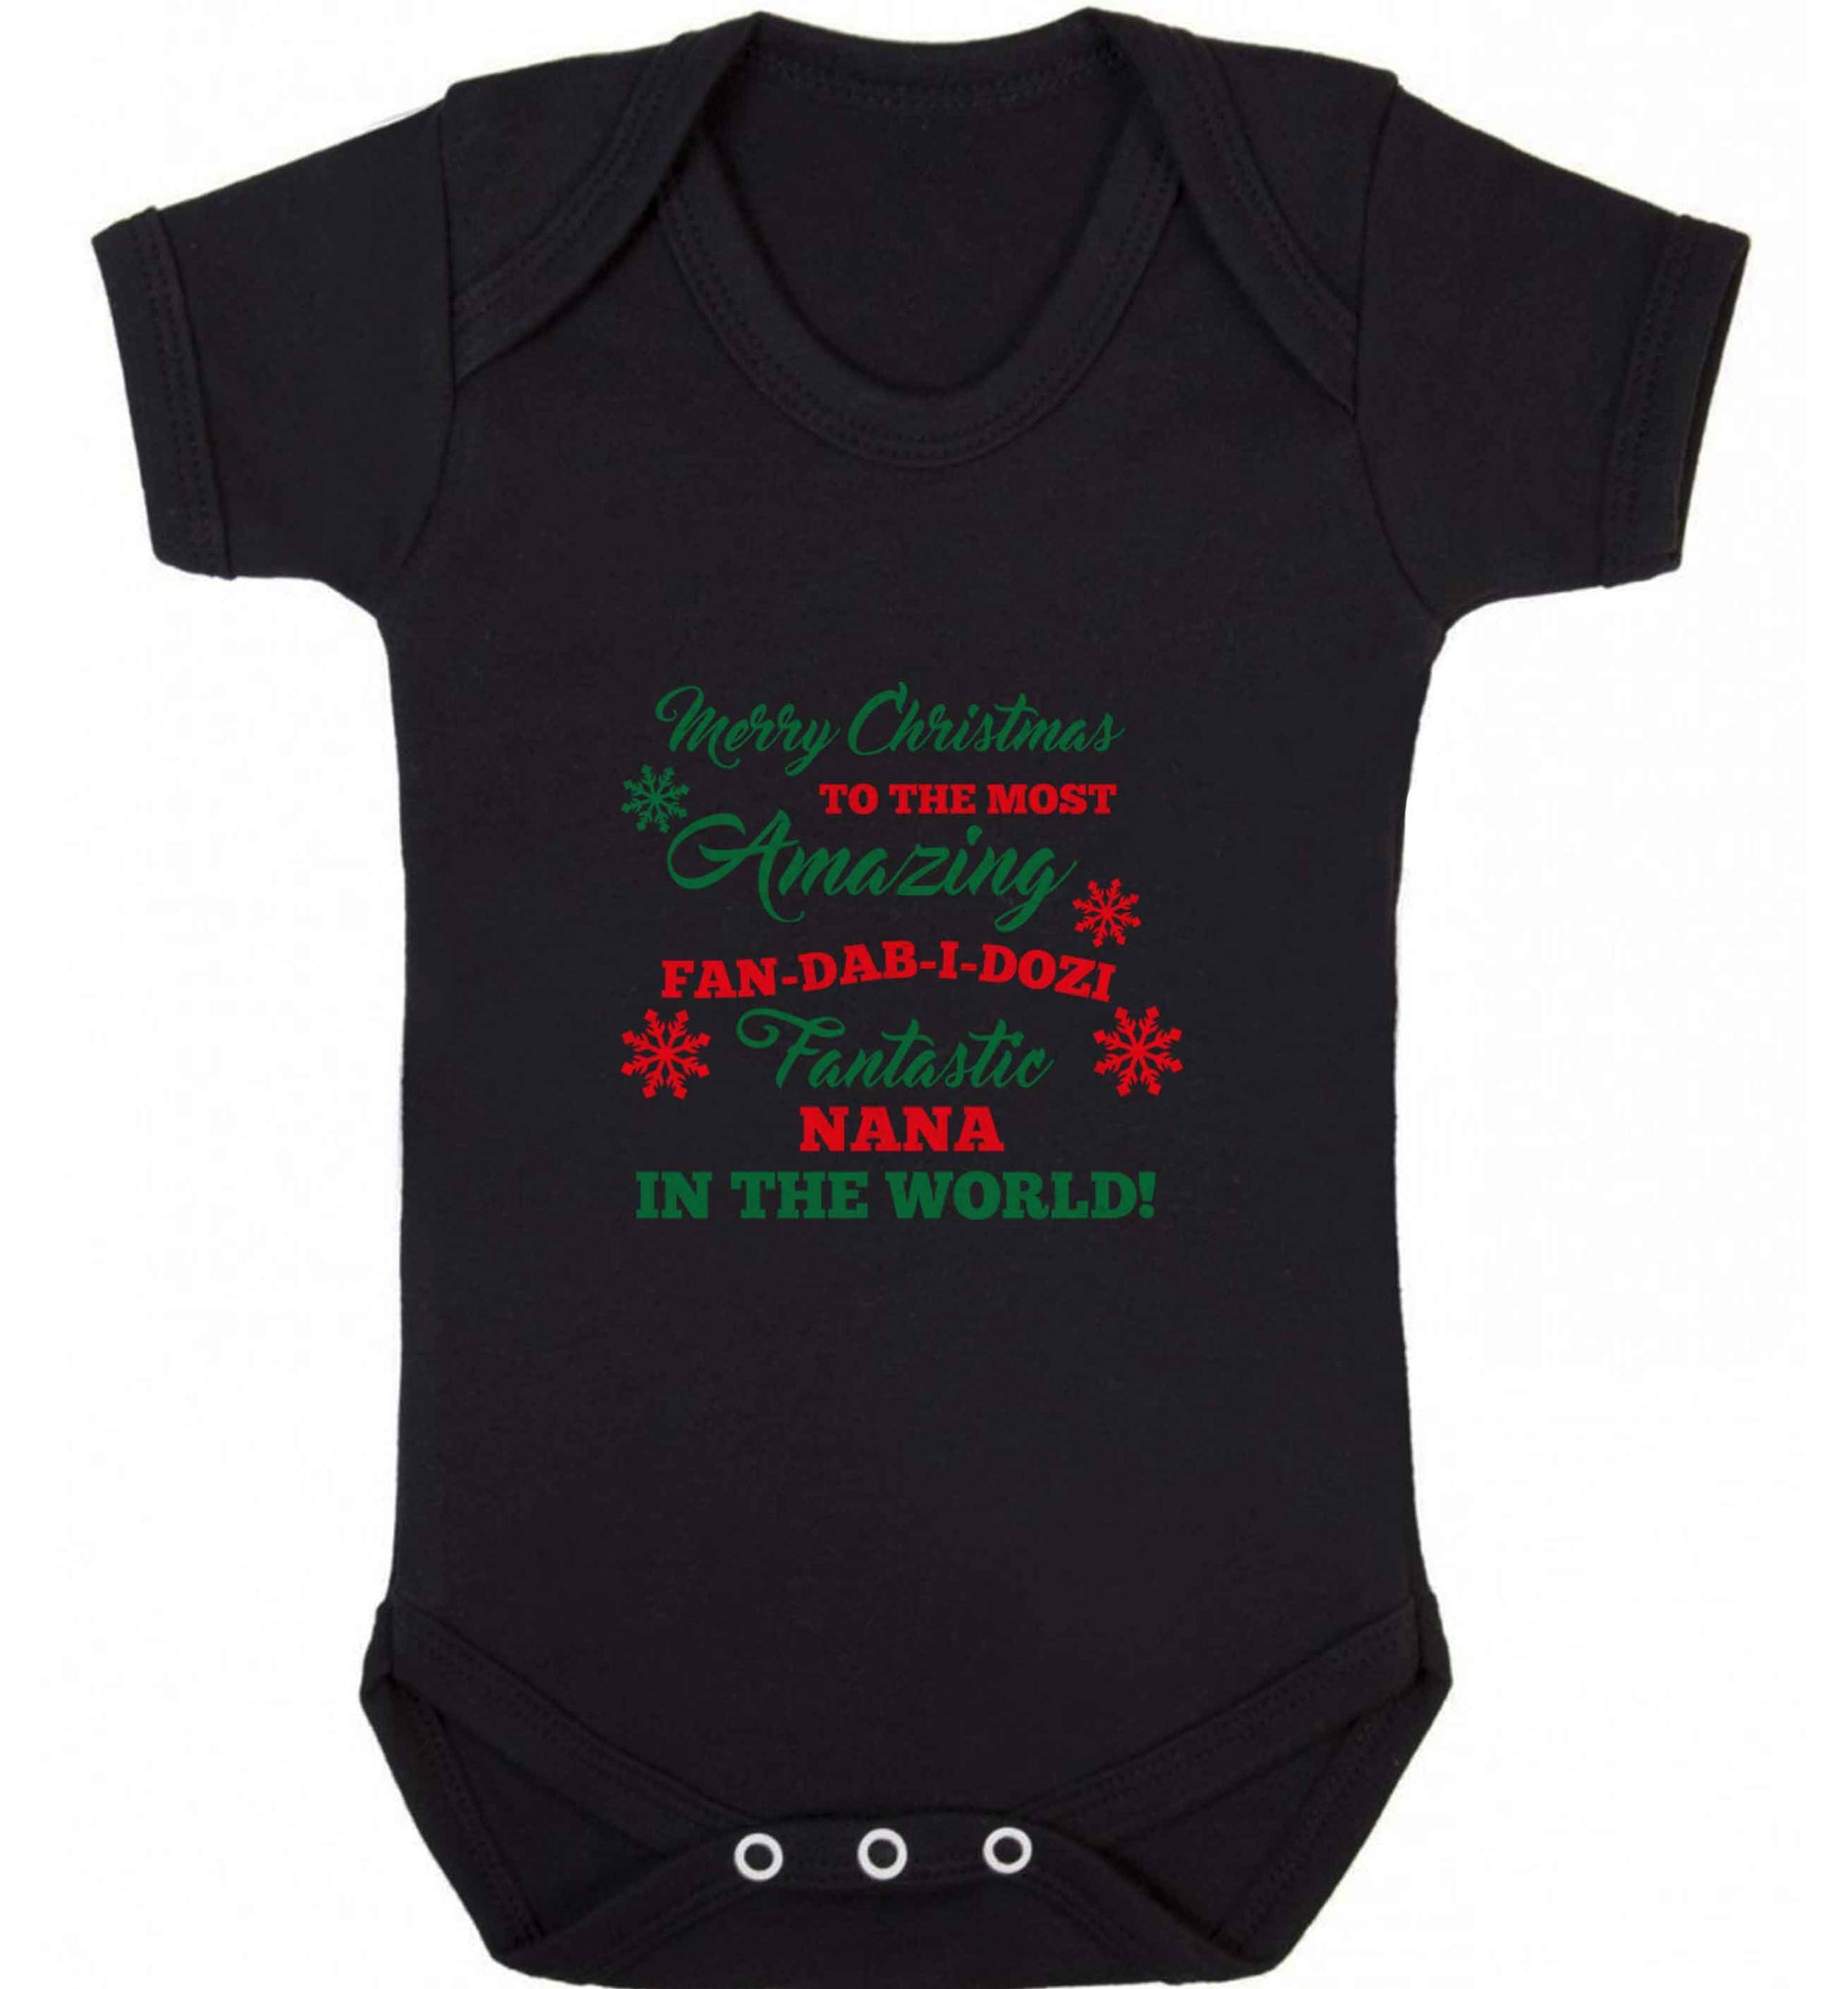 Merry Christmas to the most amazing fan-dab-i-dozi fantasic Nana in the world baby vest black 18-24 months